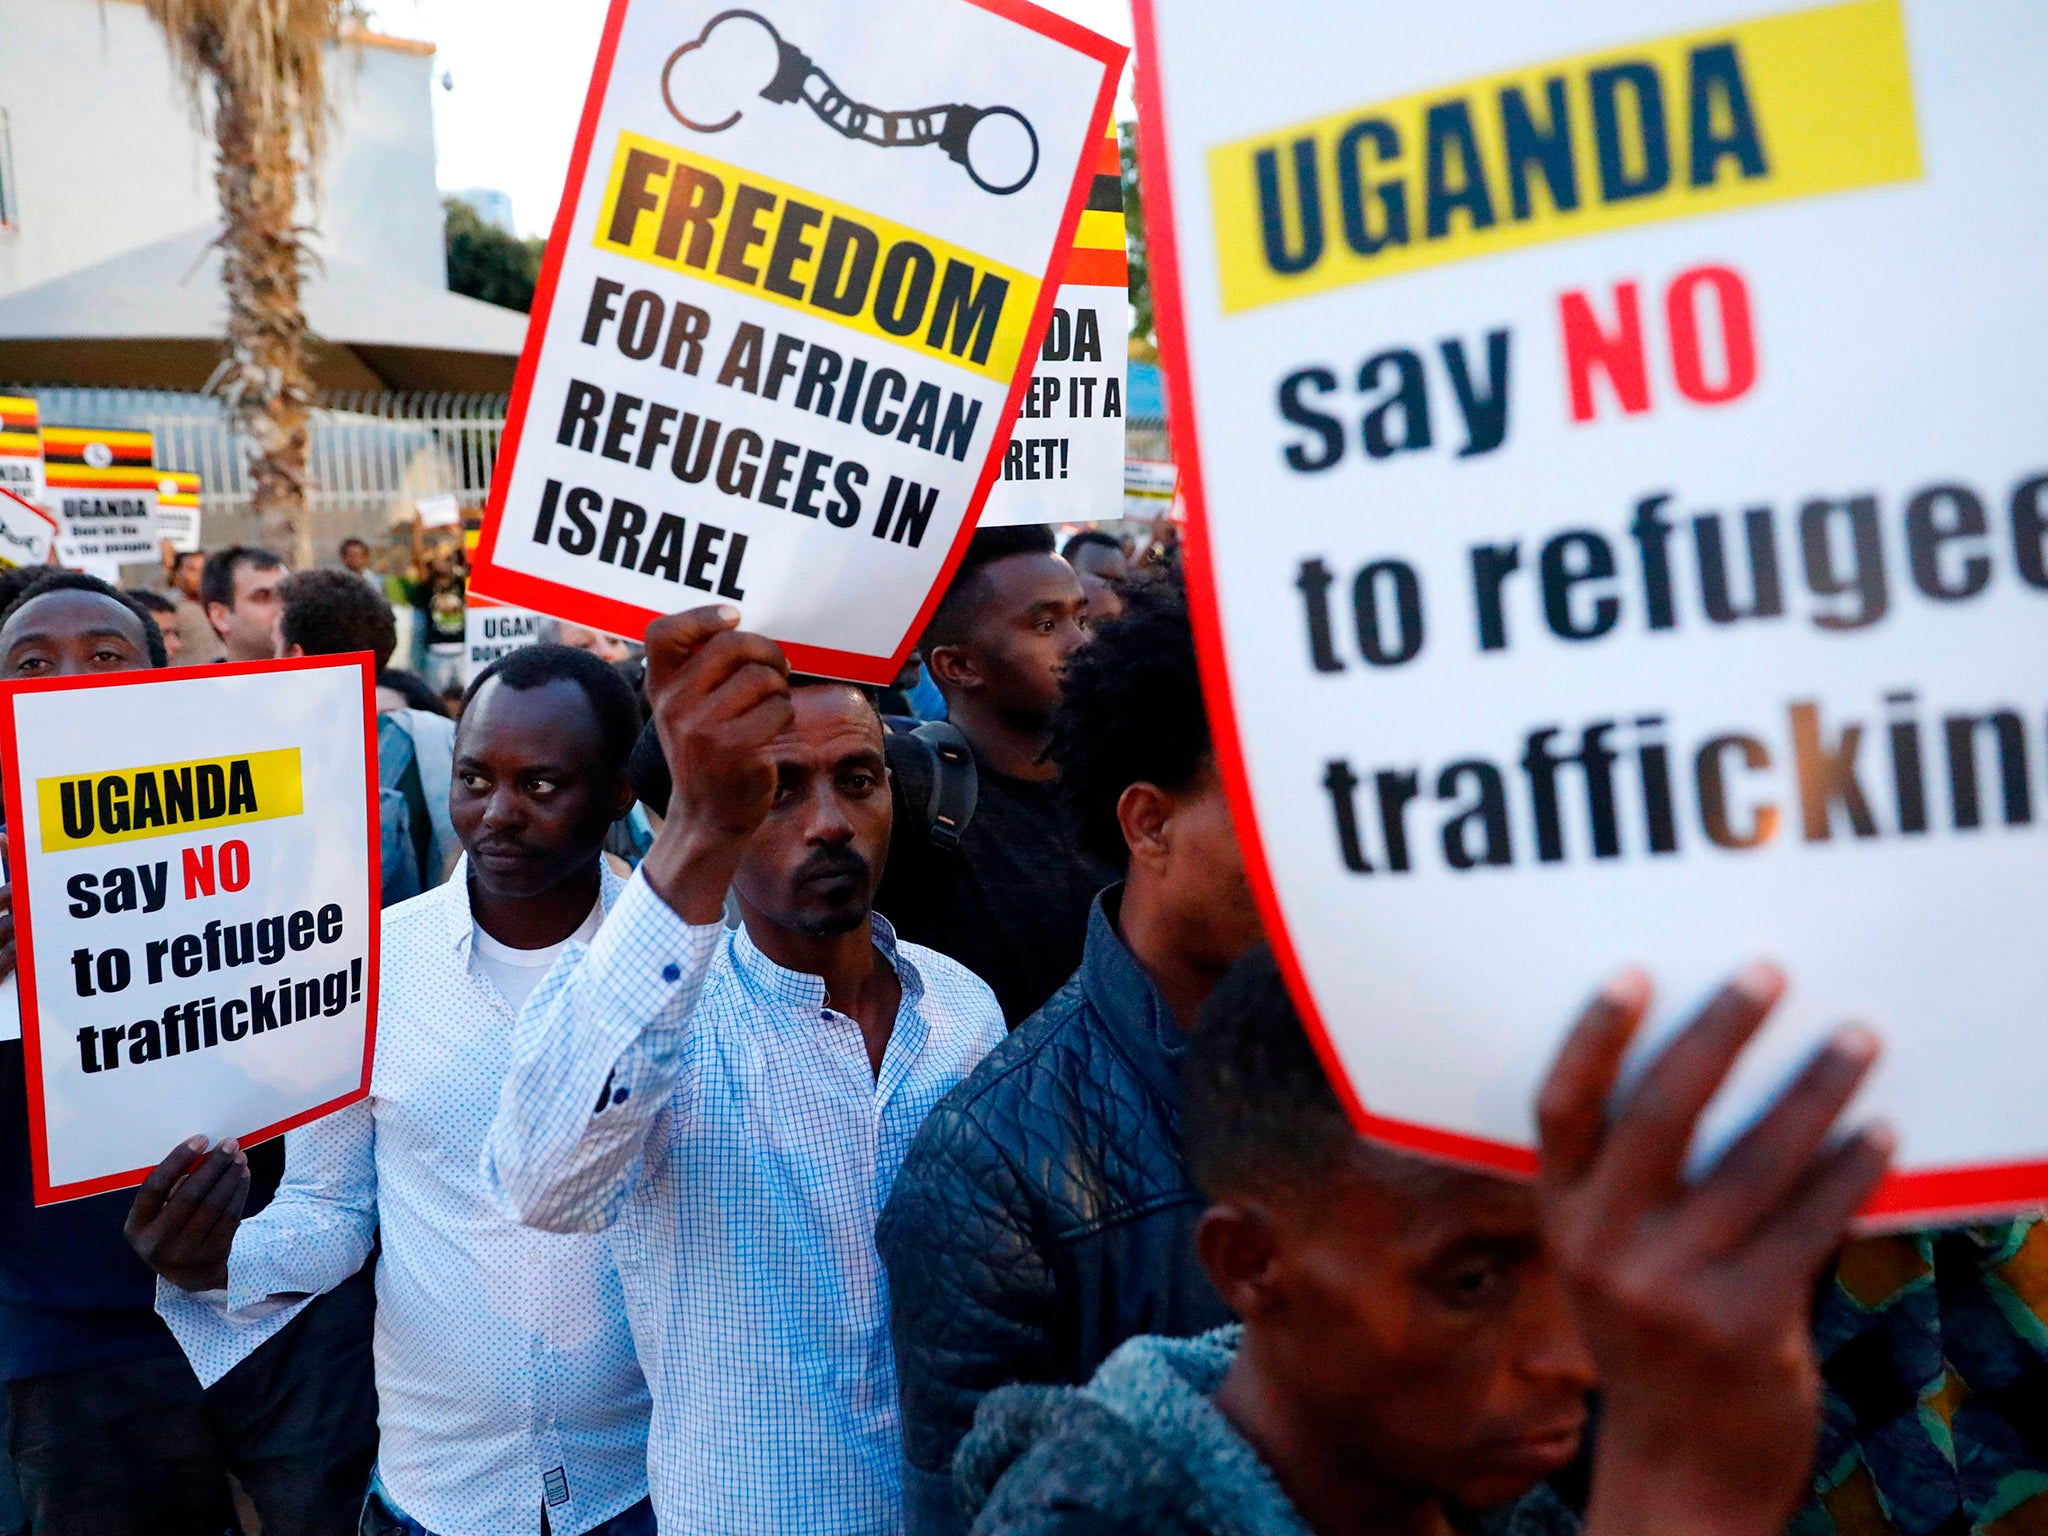 African migrants and Israelis demonstrate in Tel Aviv on April 9, 2018 against the Israeli government's policy to forcibly deport African refugees and asylum seekers.